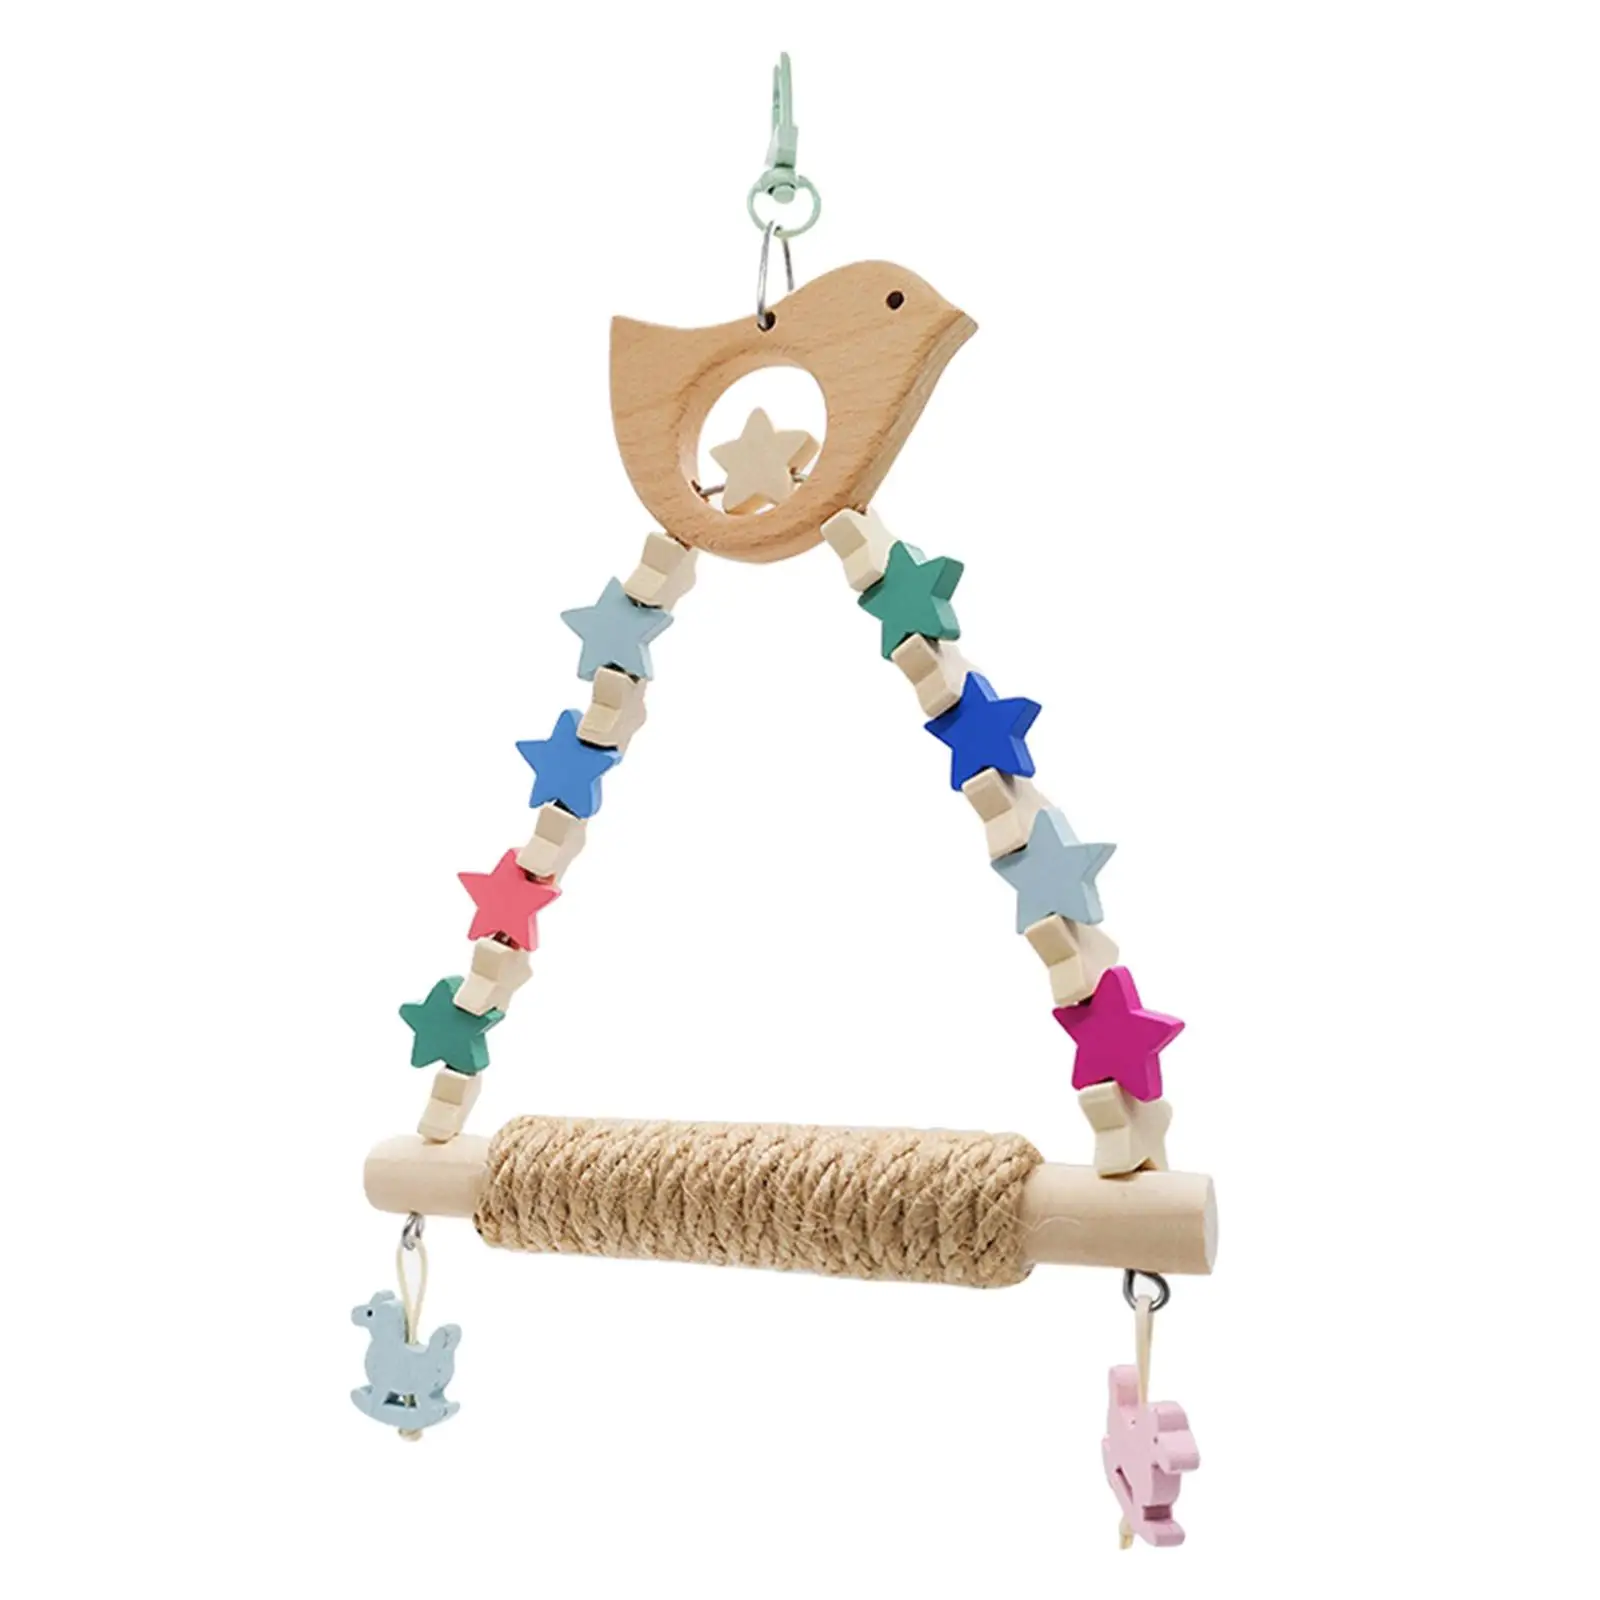 Portable Parrot Swing Toy Intelligence Training Parrot Cage Decor Budgie Stable Lightweight Stand Toy Bird Toy